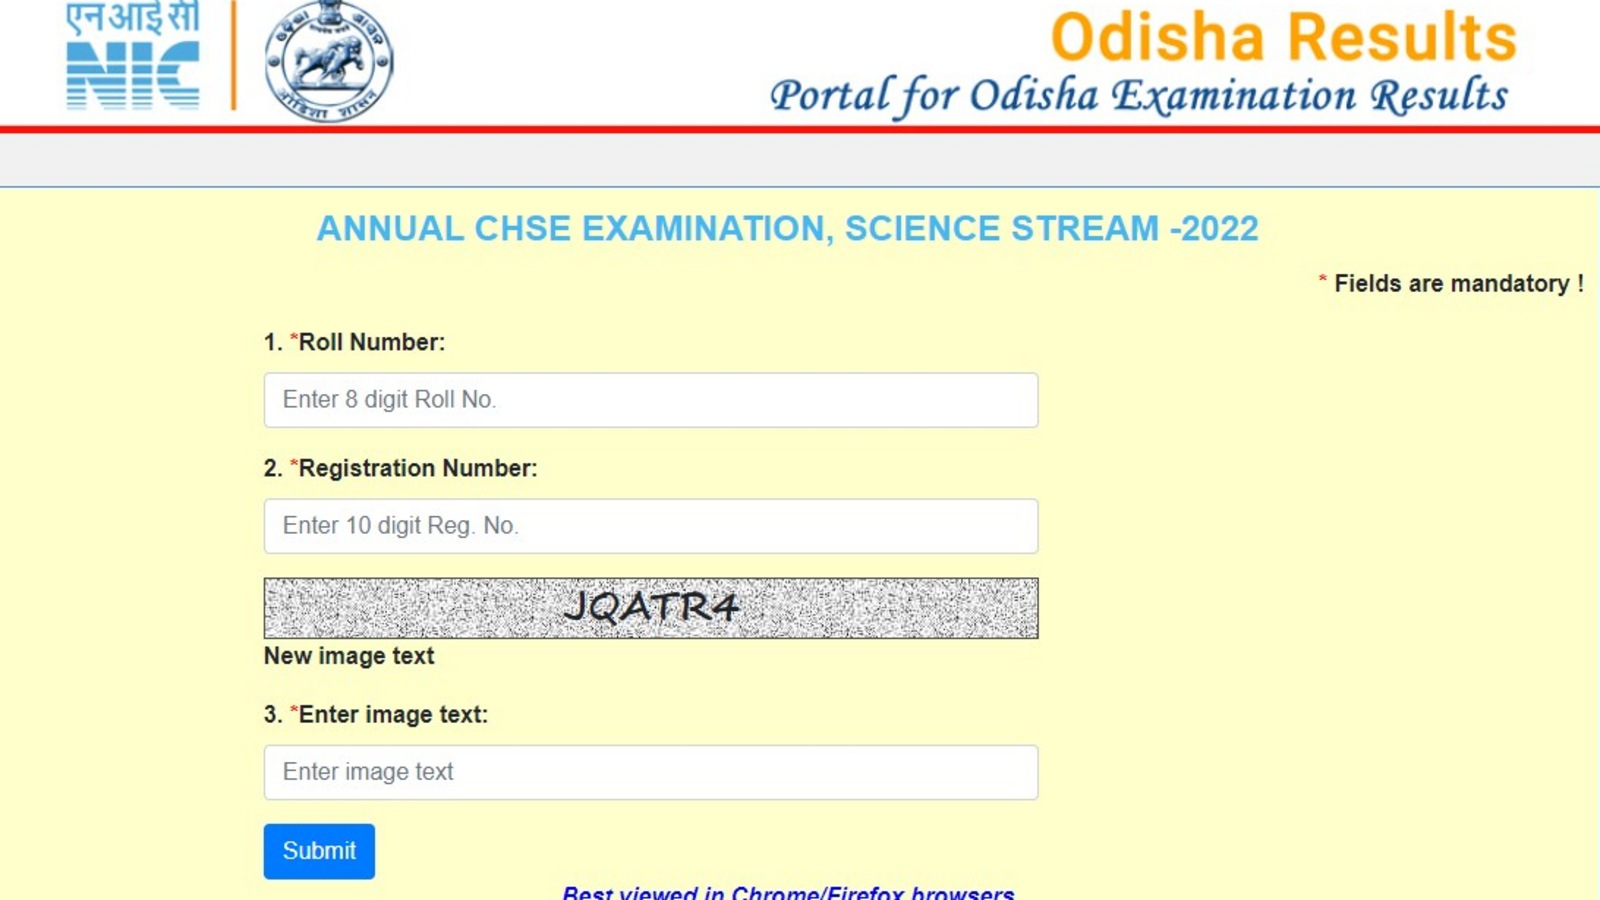 Odisha CHSE Result 2022 Live: 94.12% pass Class 12th Science, 89.2% in Commerce